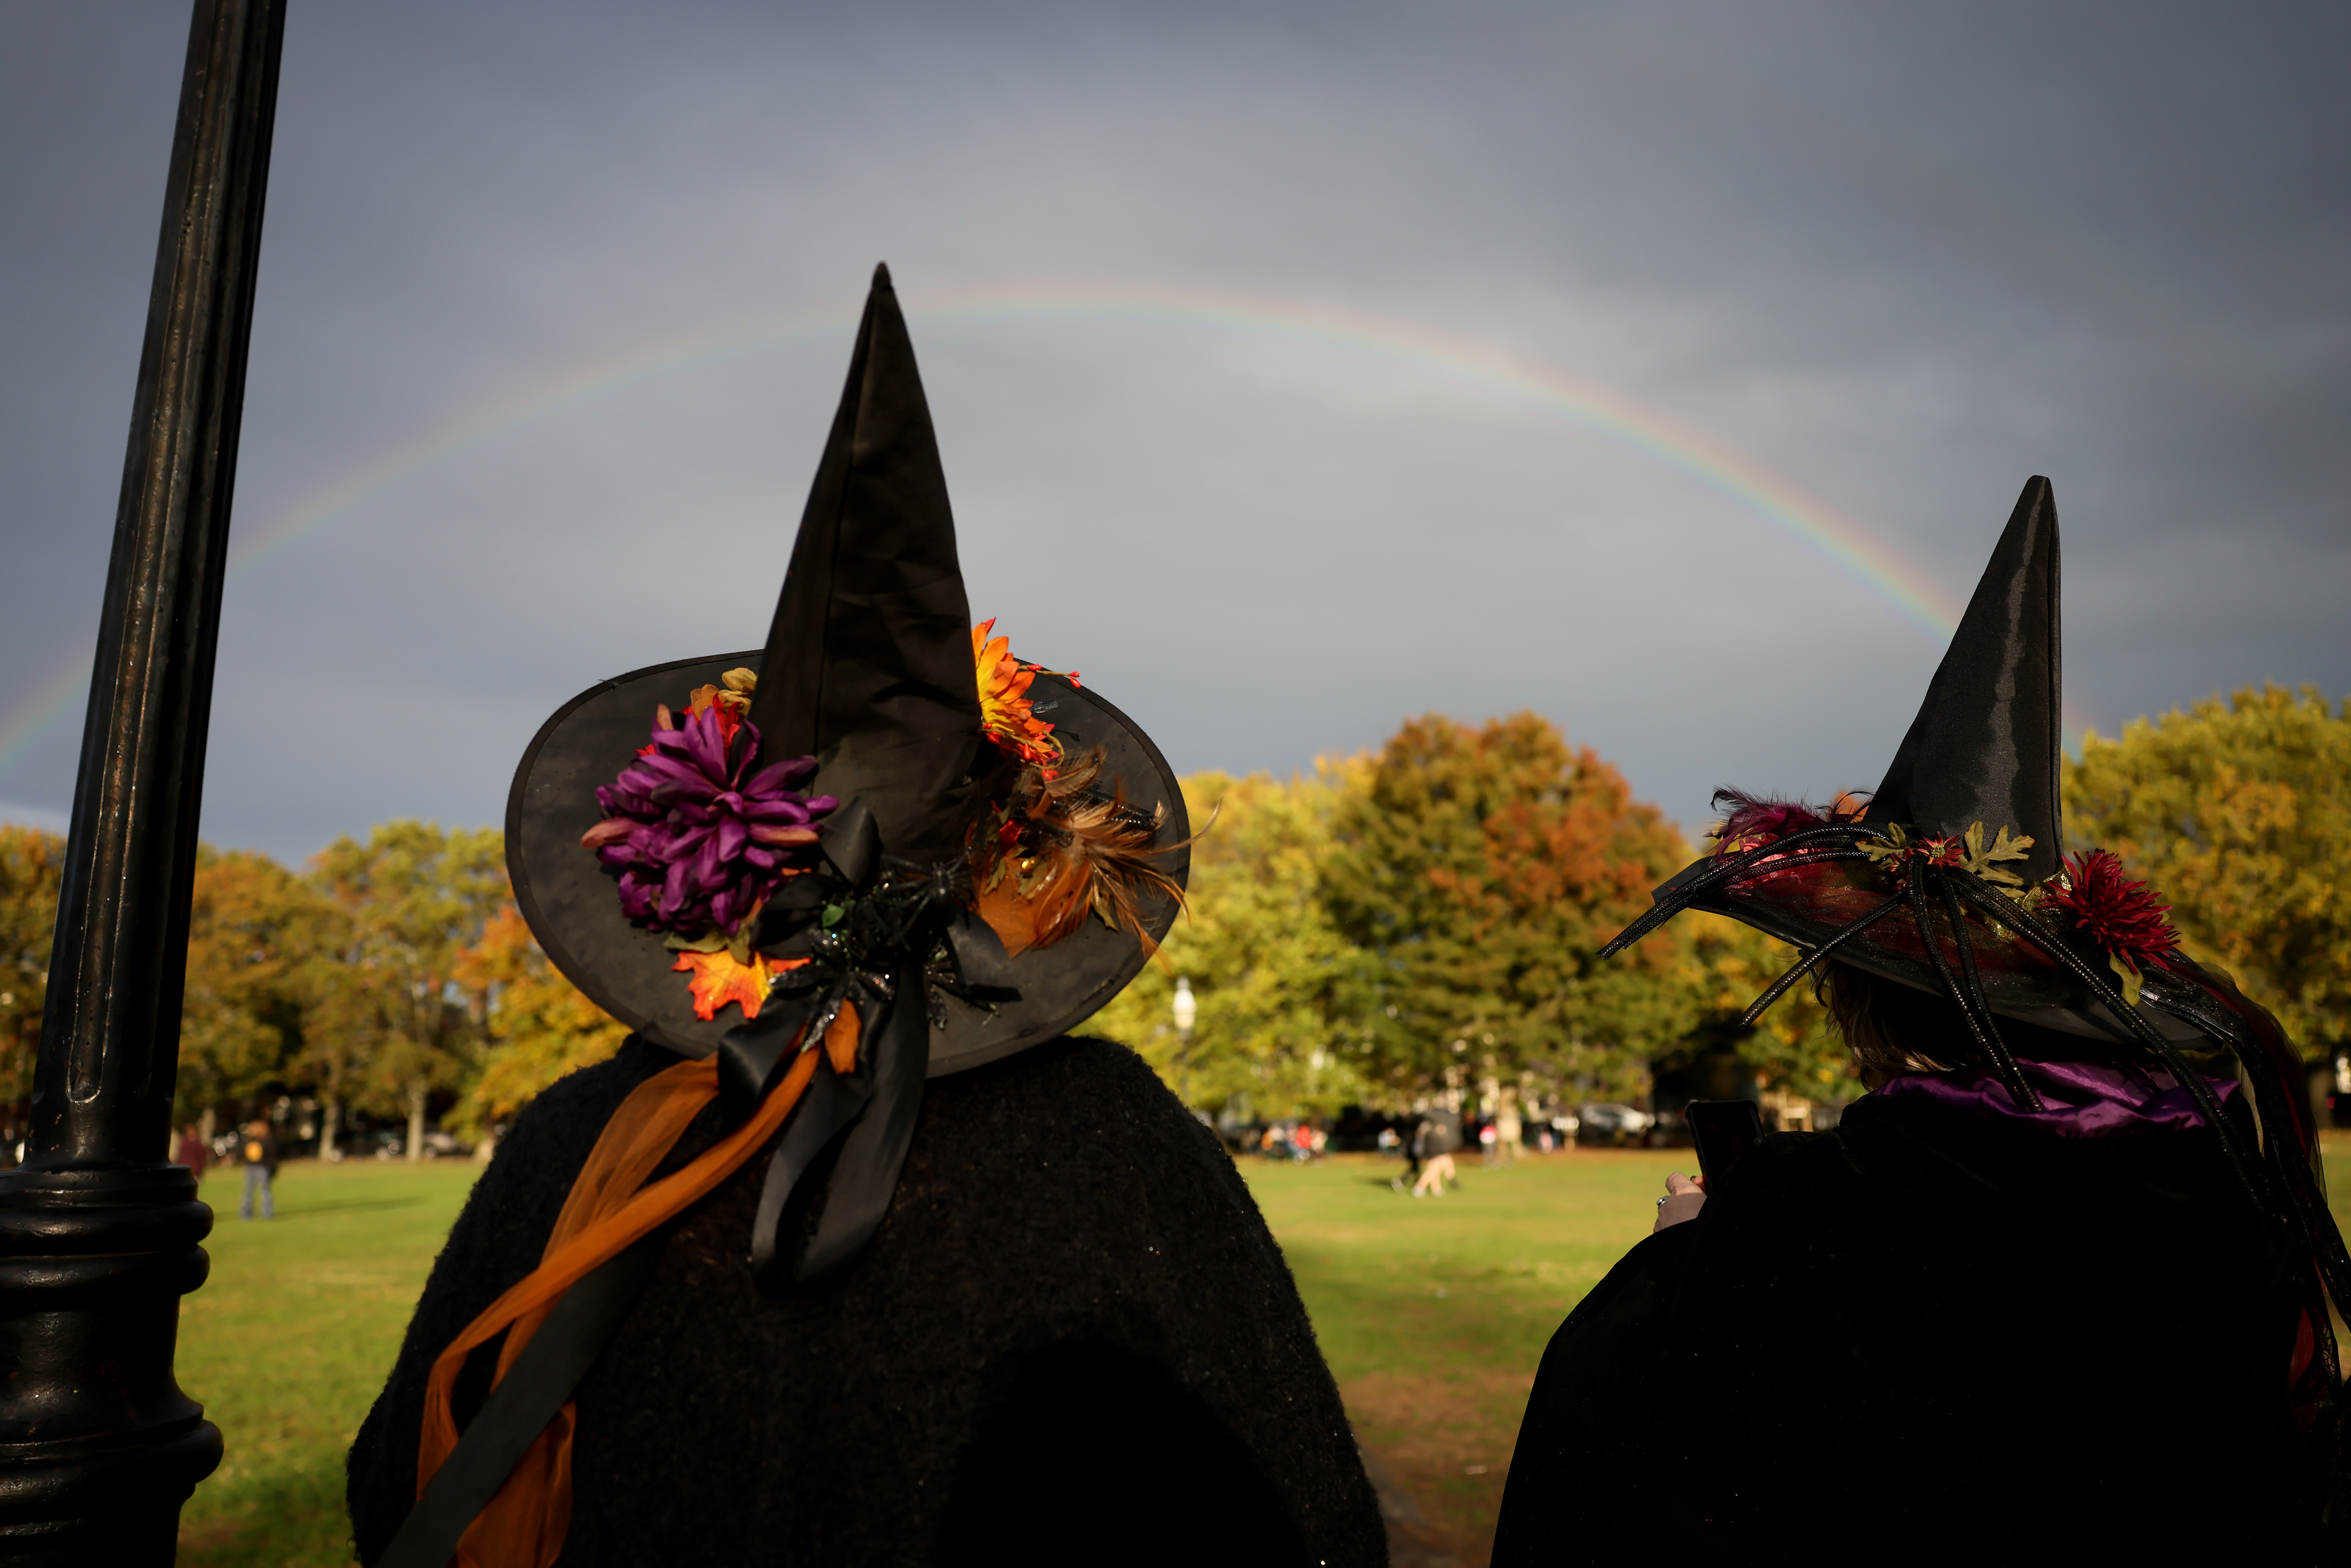 Public safety at the forefront of Salem Halloween celebrations – NBC Boston